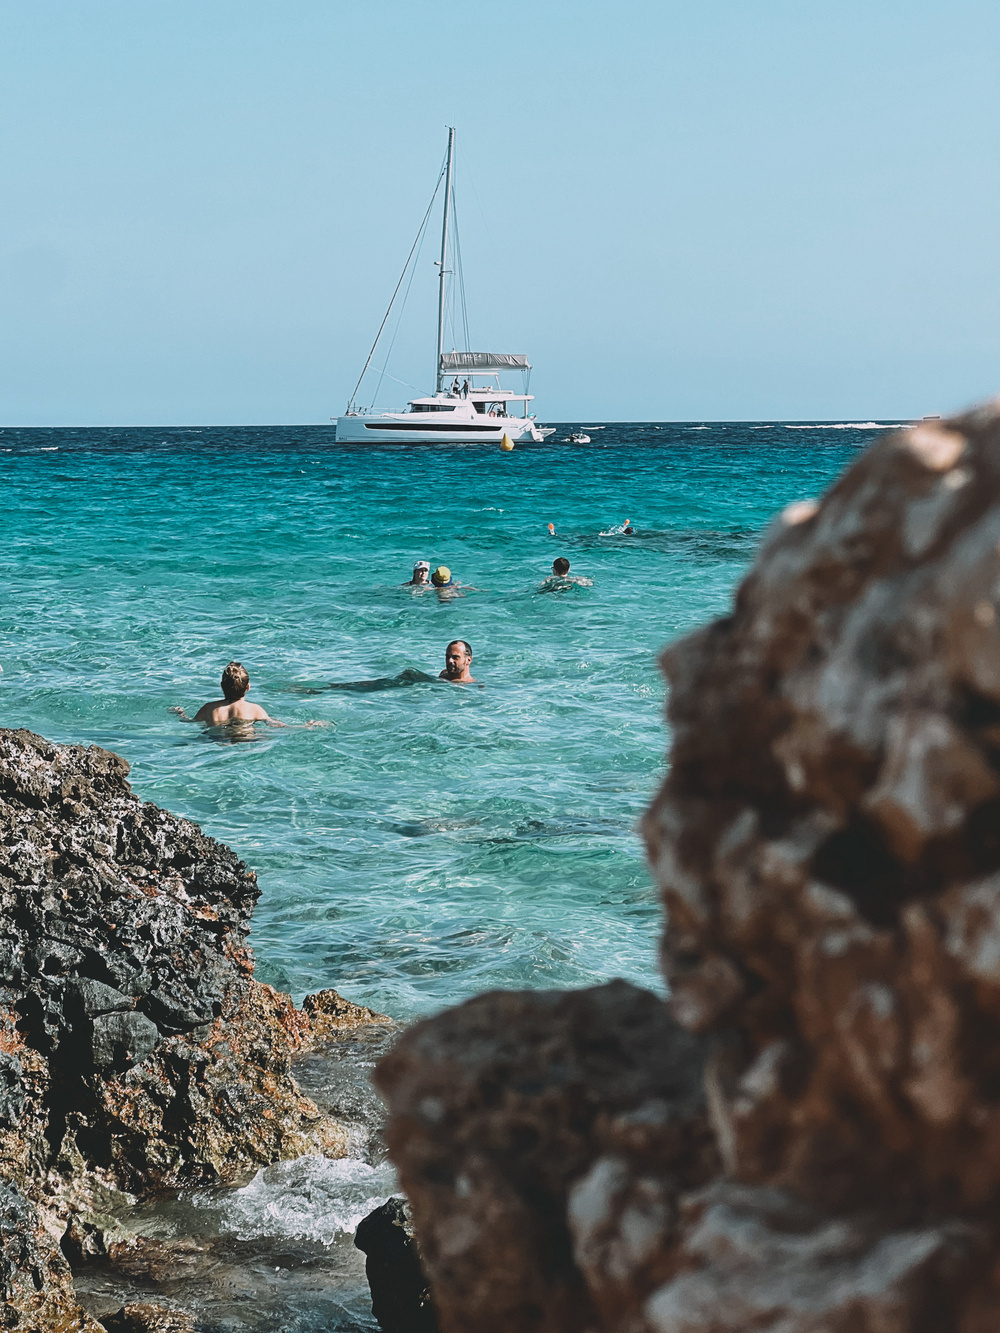 People swimming in clear blue water near rocky shore, with a white sailboat anchored in the background.